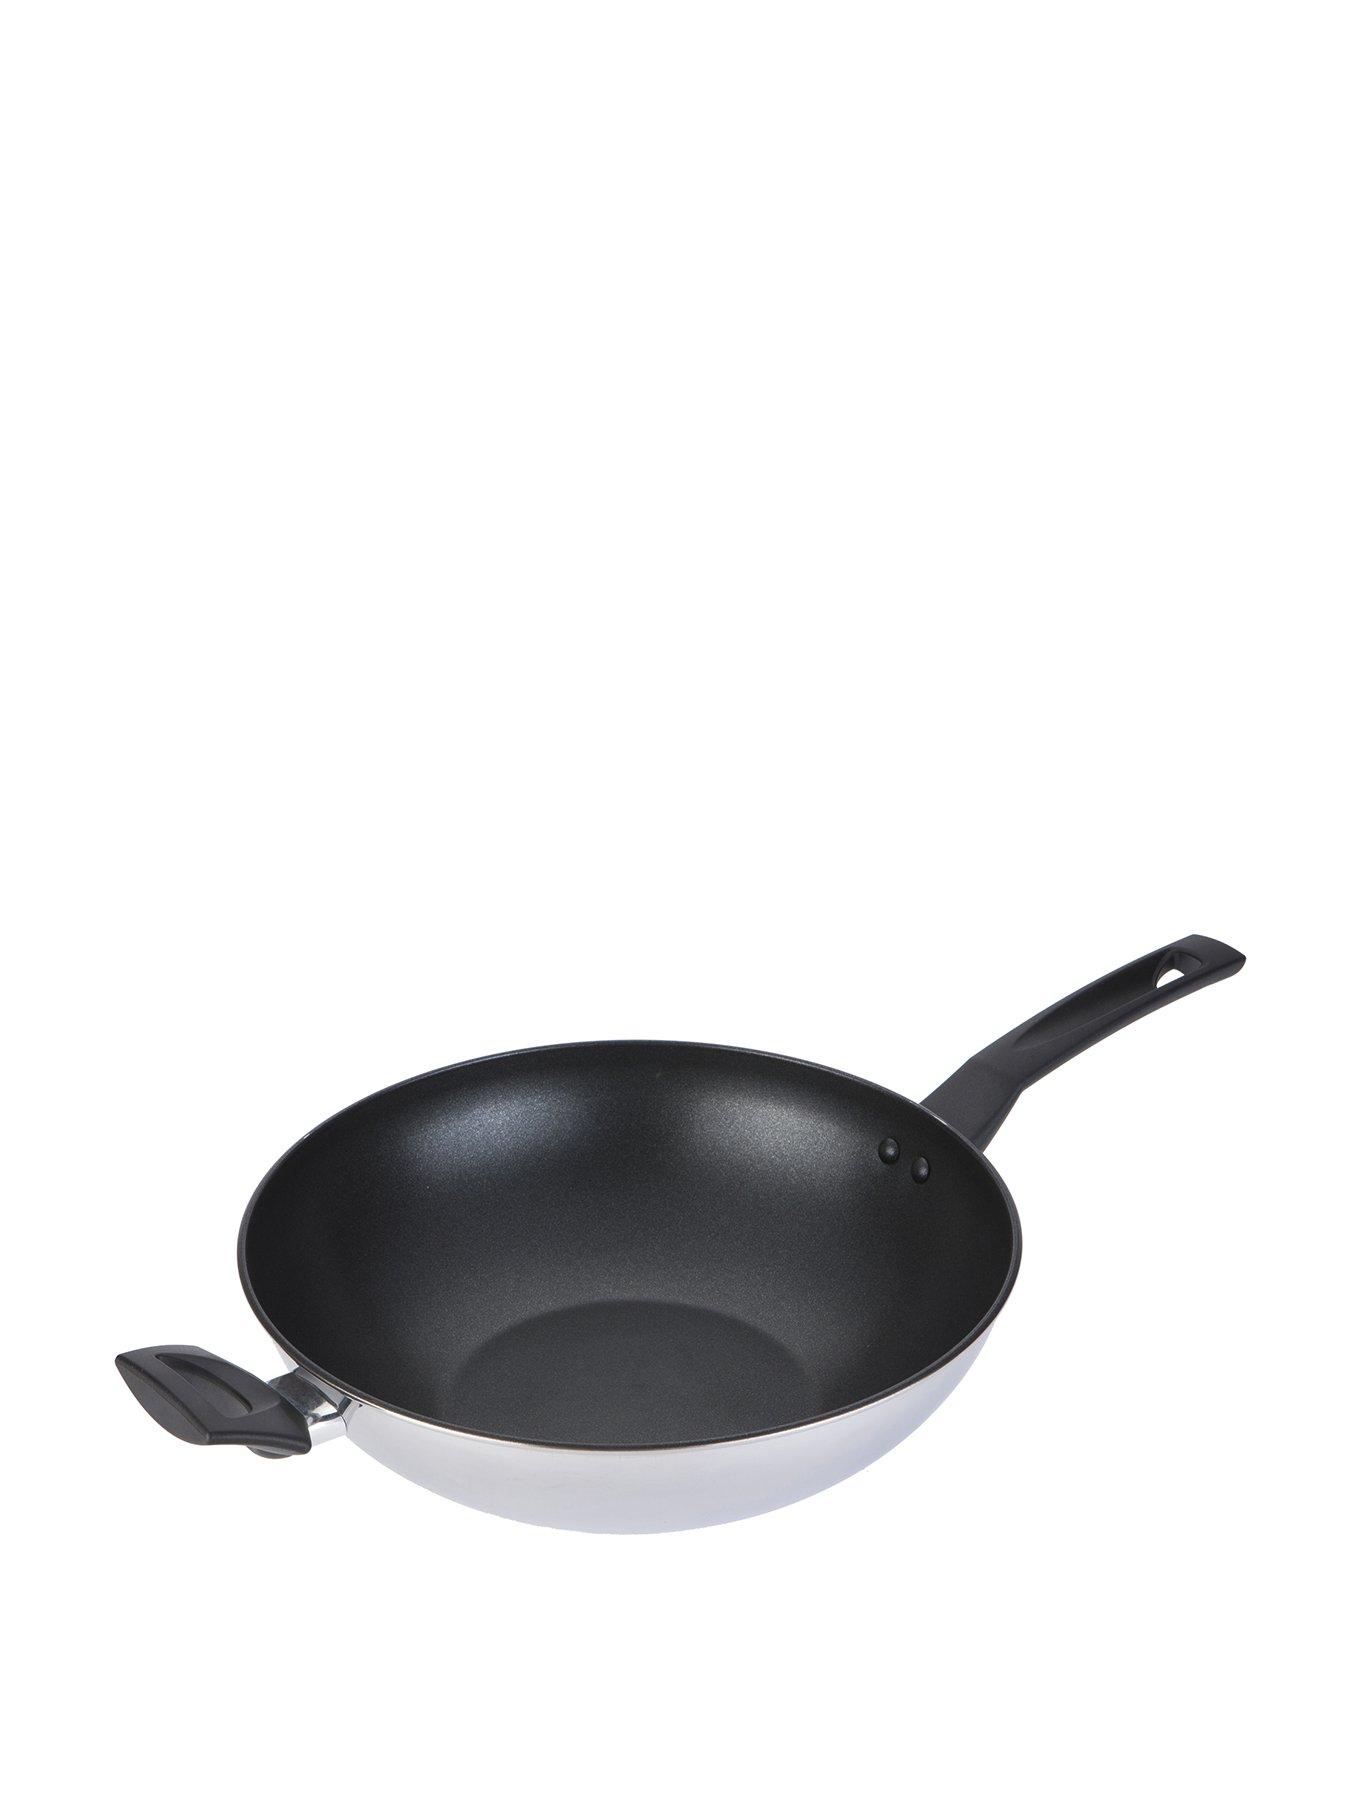 Suitable for All Hobs Wok Nonstick with Silicon toughened Glass Lid Induction Hob. 30cm Stir Fry Pan with Wood Effect Handle Granite Marble Coated Forged Aluminium 